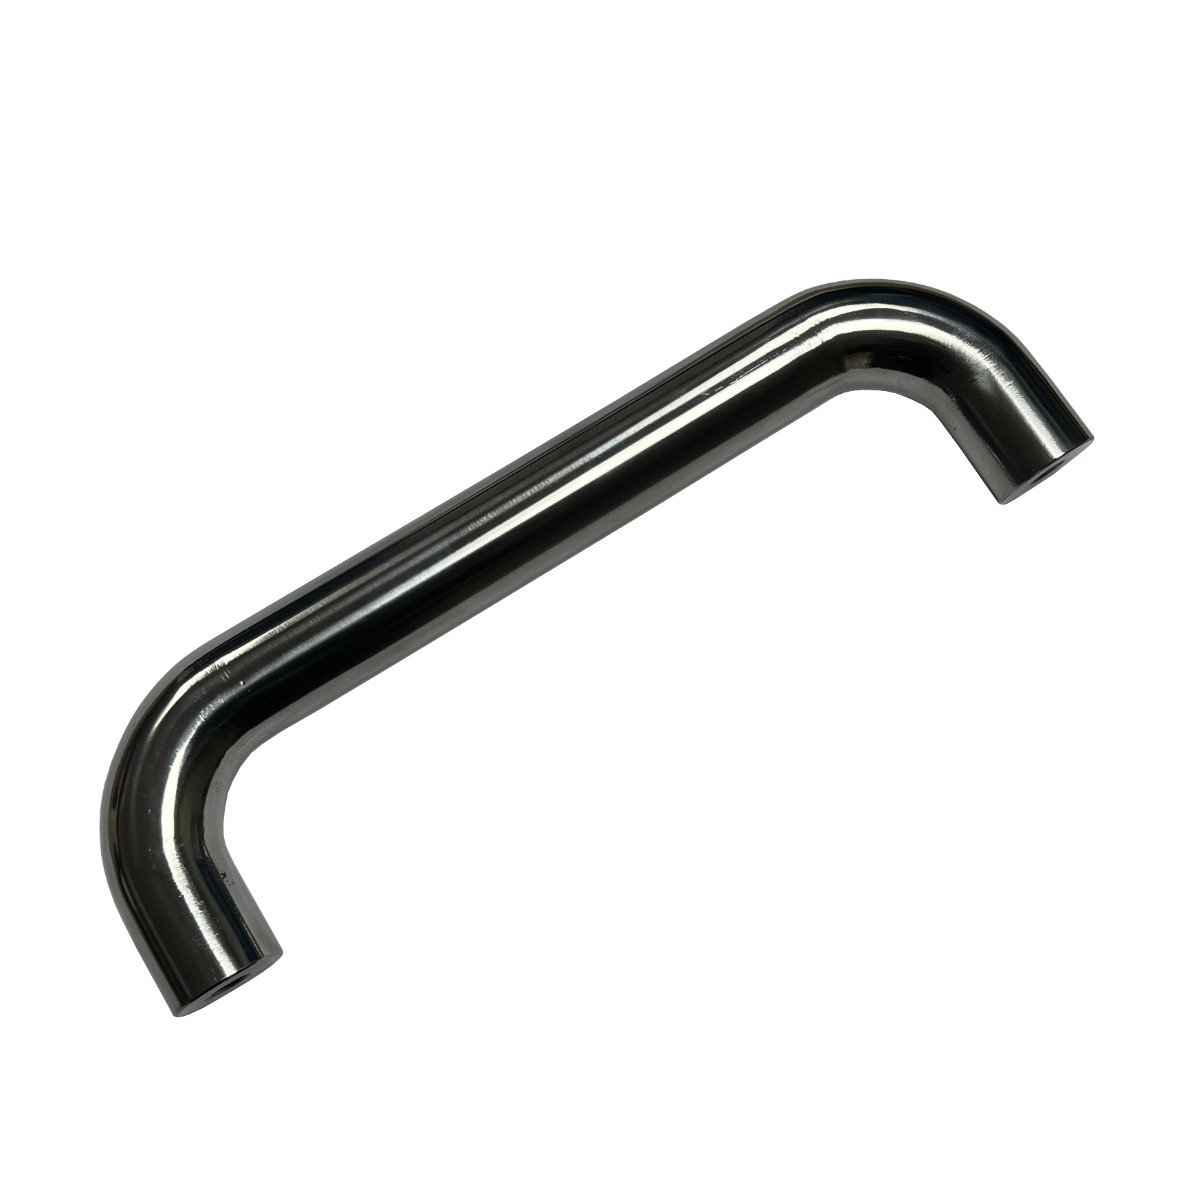 Stainless Steel Grab Rail Hand Grip For Use On Play Towers Or Spring Rockers